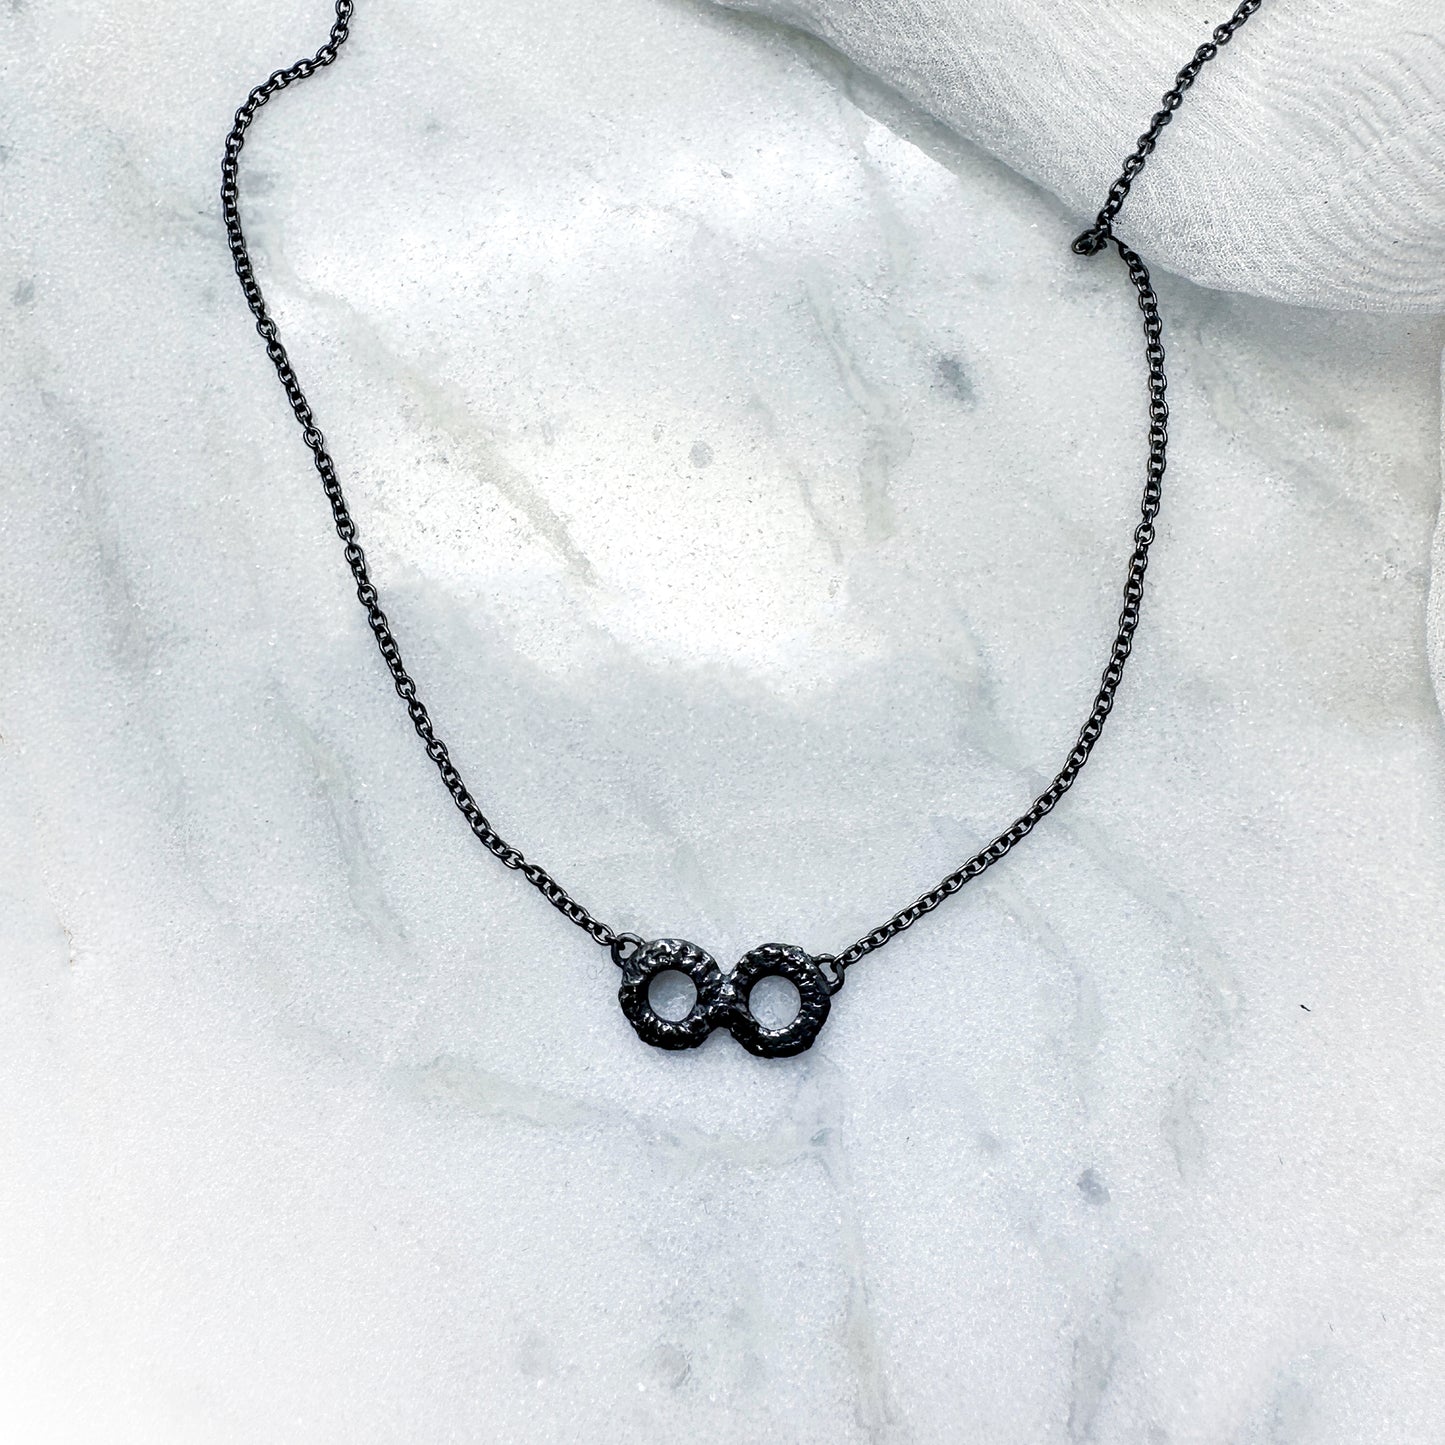 Infinity necklace in oxidised silver